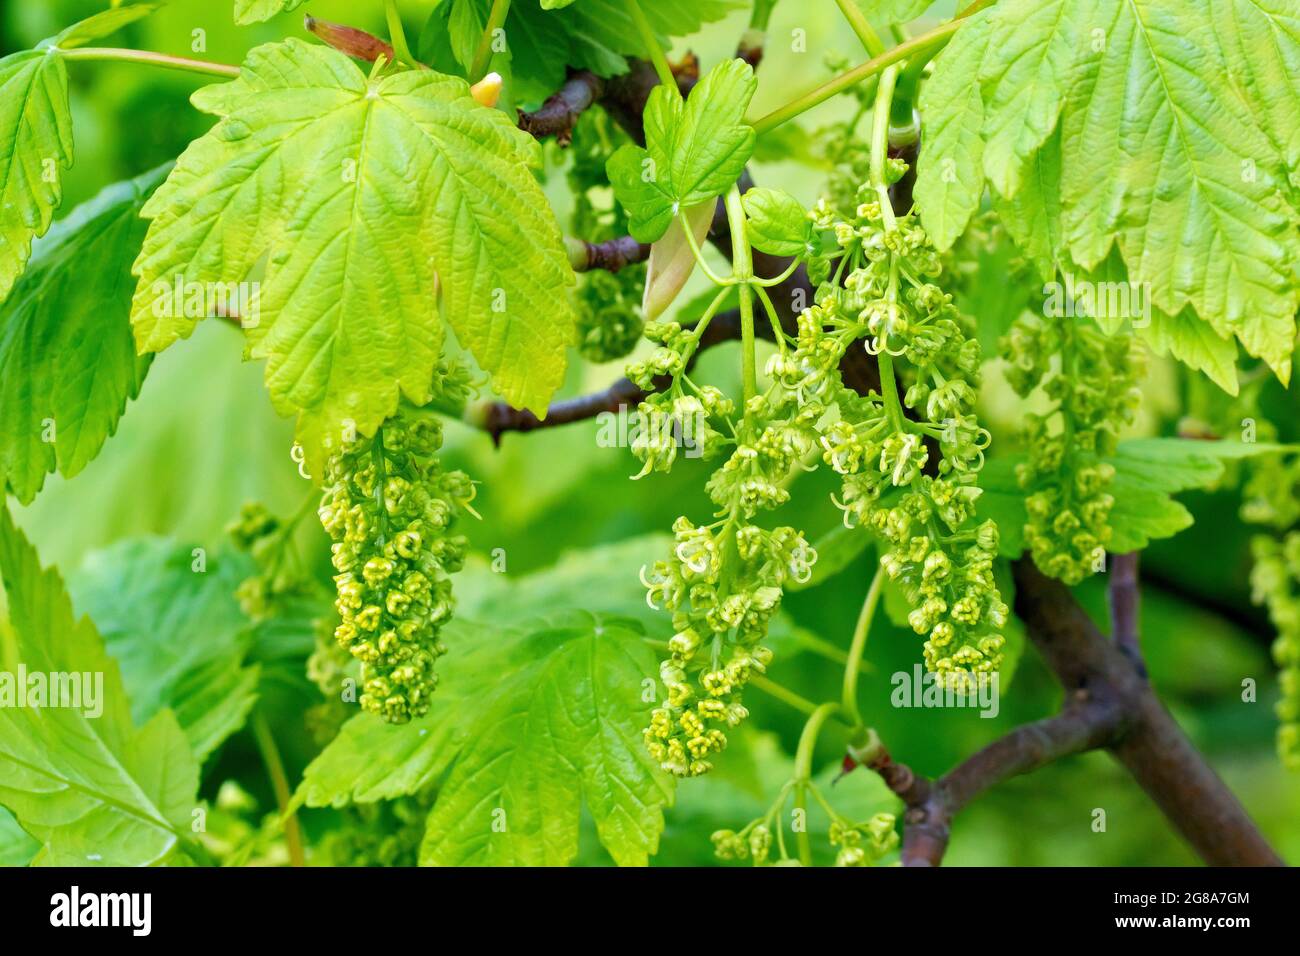 Sycamore (acer pseudoplatanus), close up of several sprays of flowers hanging beneath the leaves of a tree in spring. Stock Photo